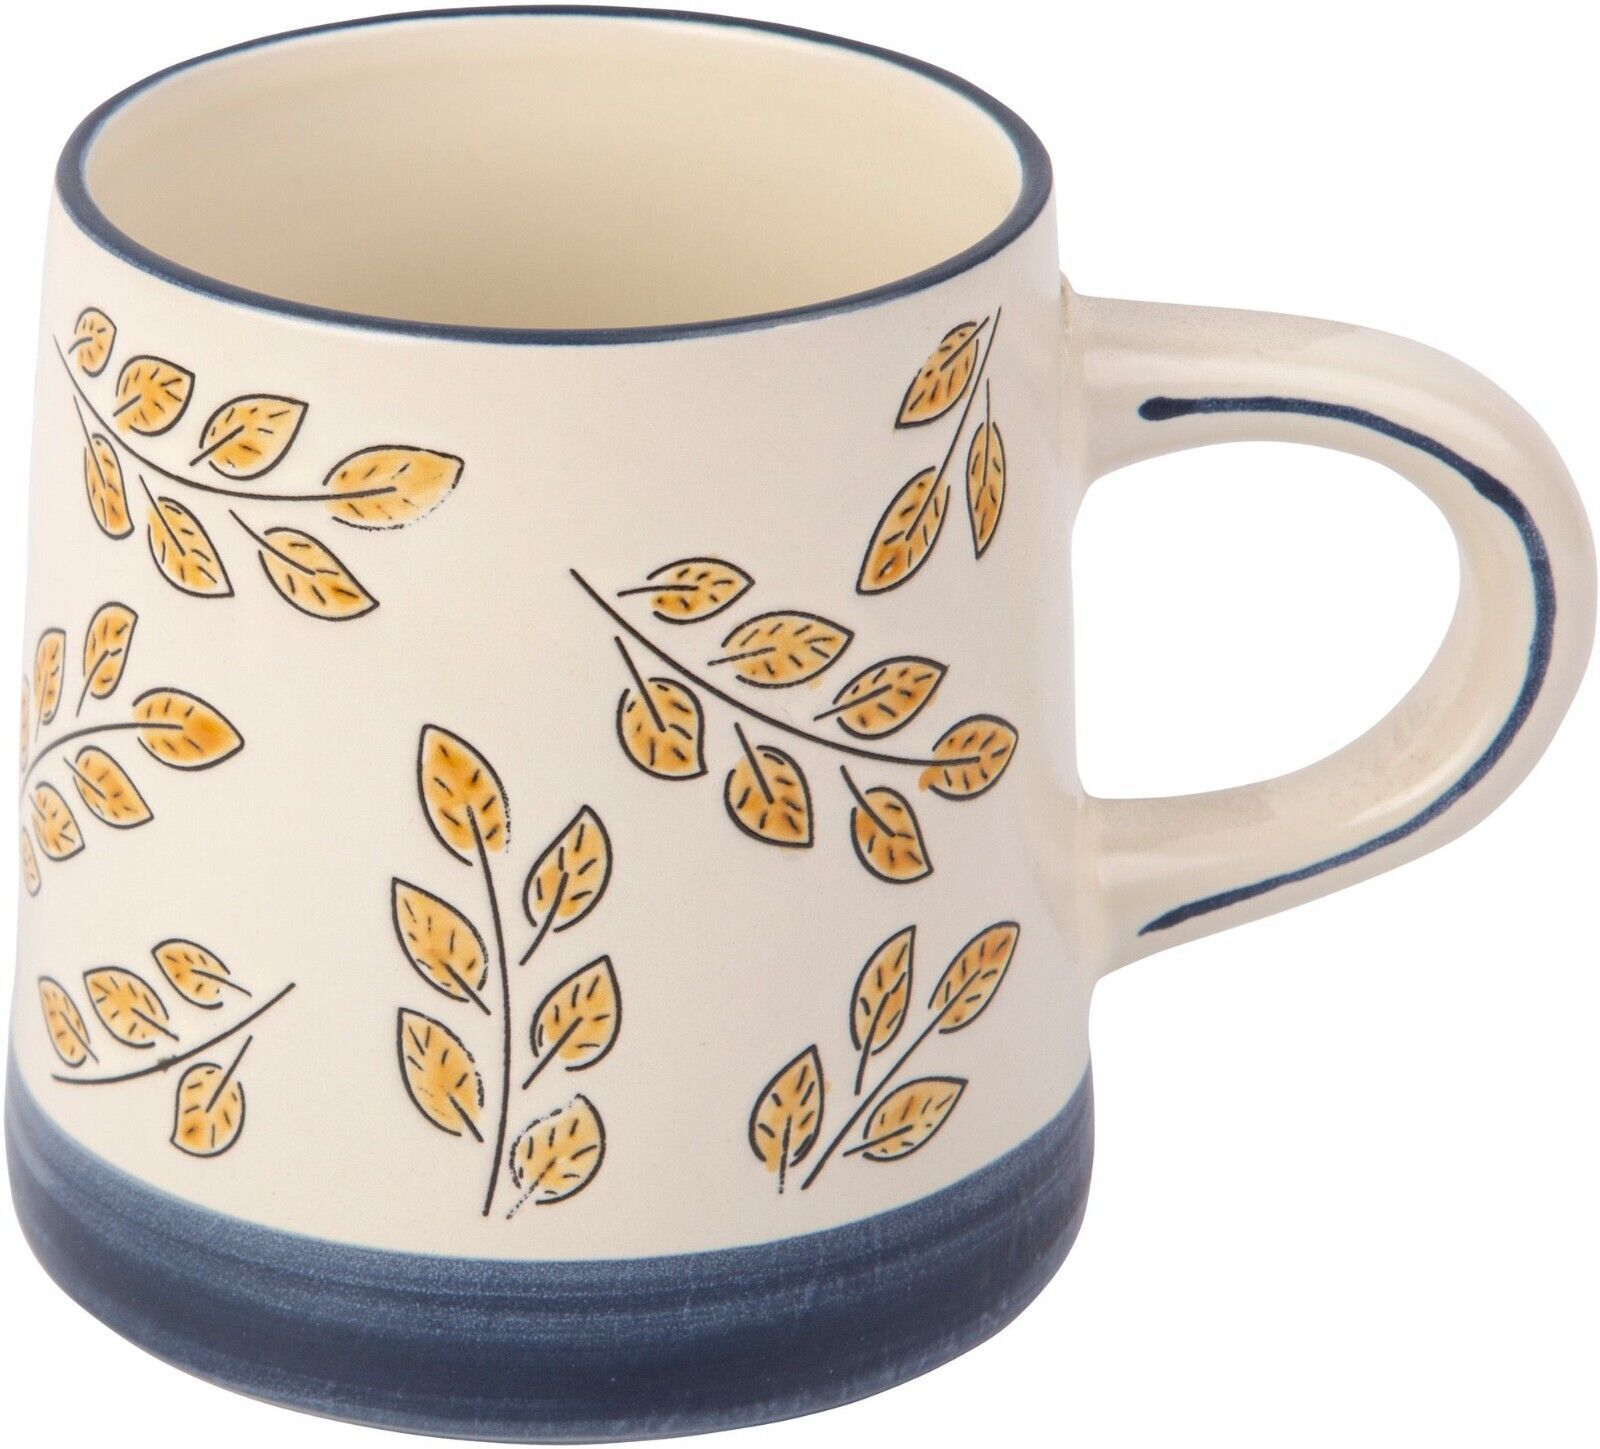 Primary image for 18OZ FALL BRANCHES MUG W/NAVY BLUE BOTTOM AND RIM SET OF 2